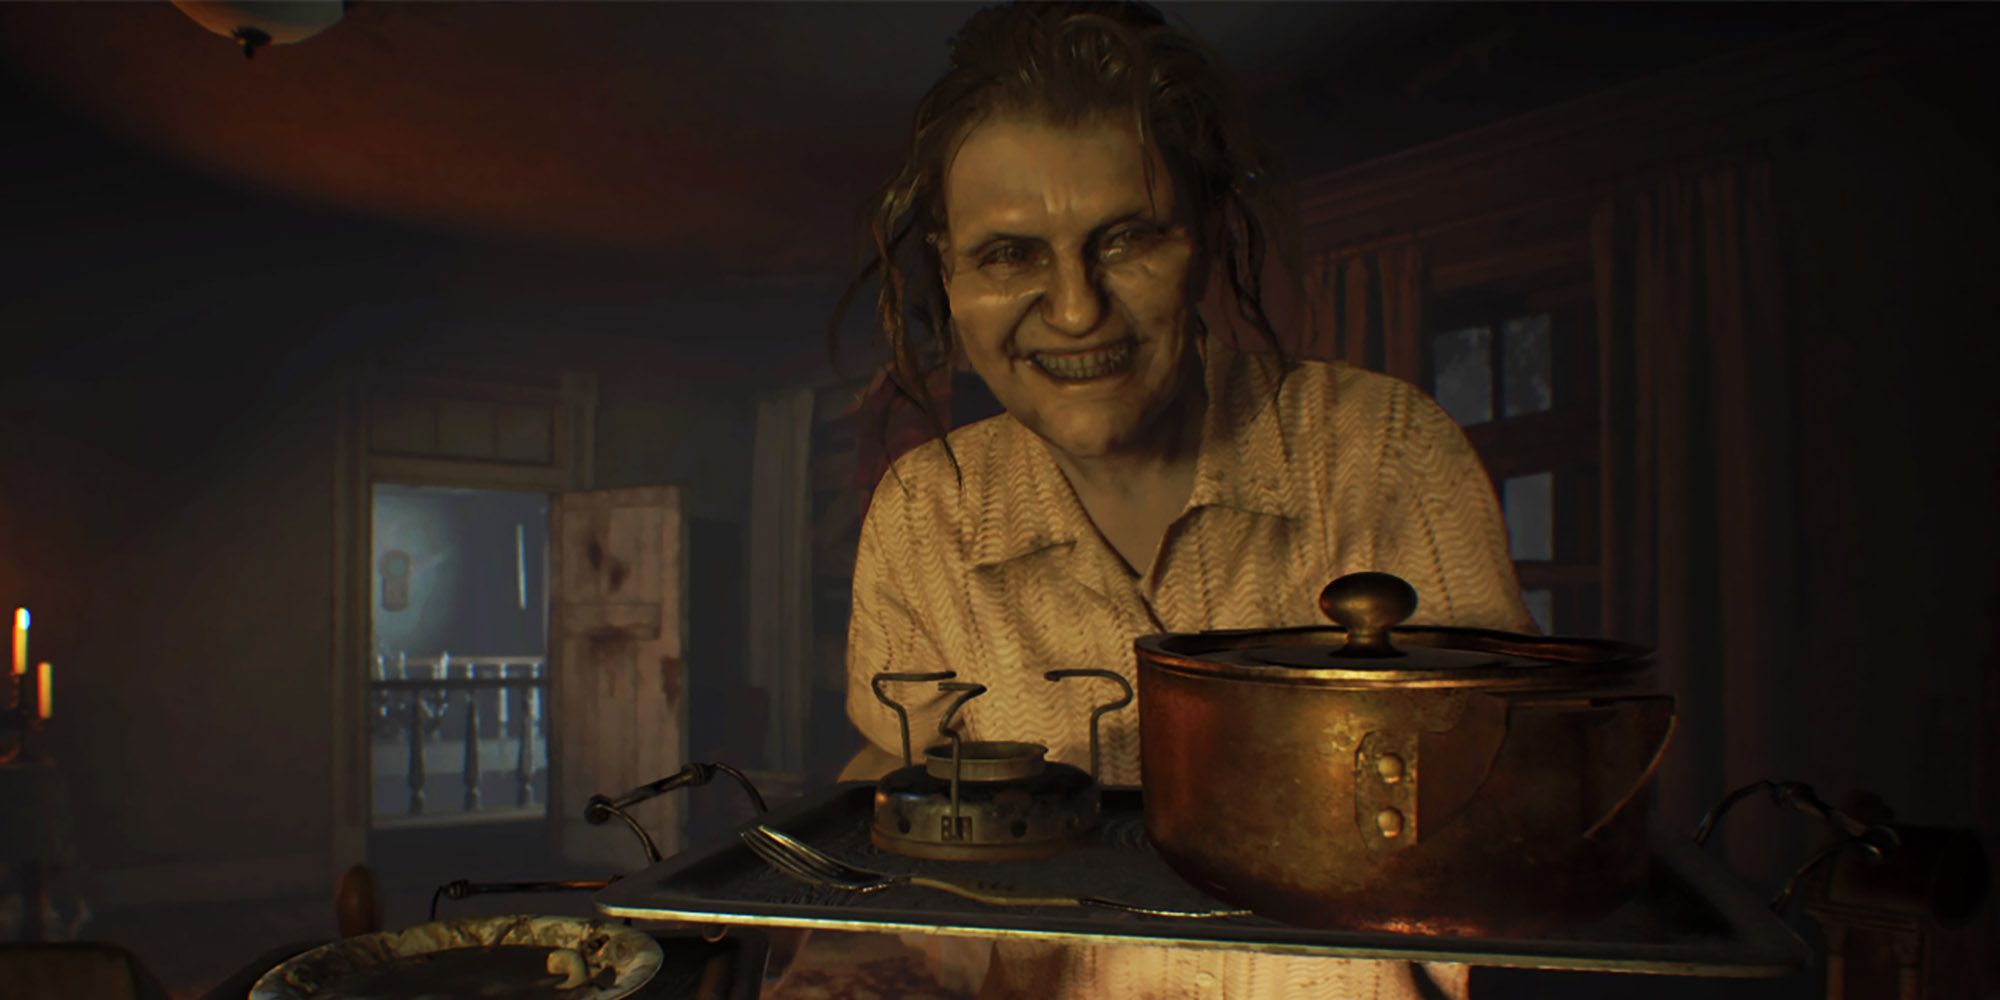 Resident Evil 7's Bedroom mini game from the Tapes DLC